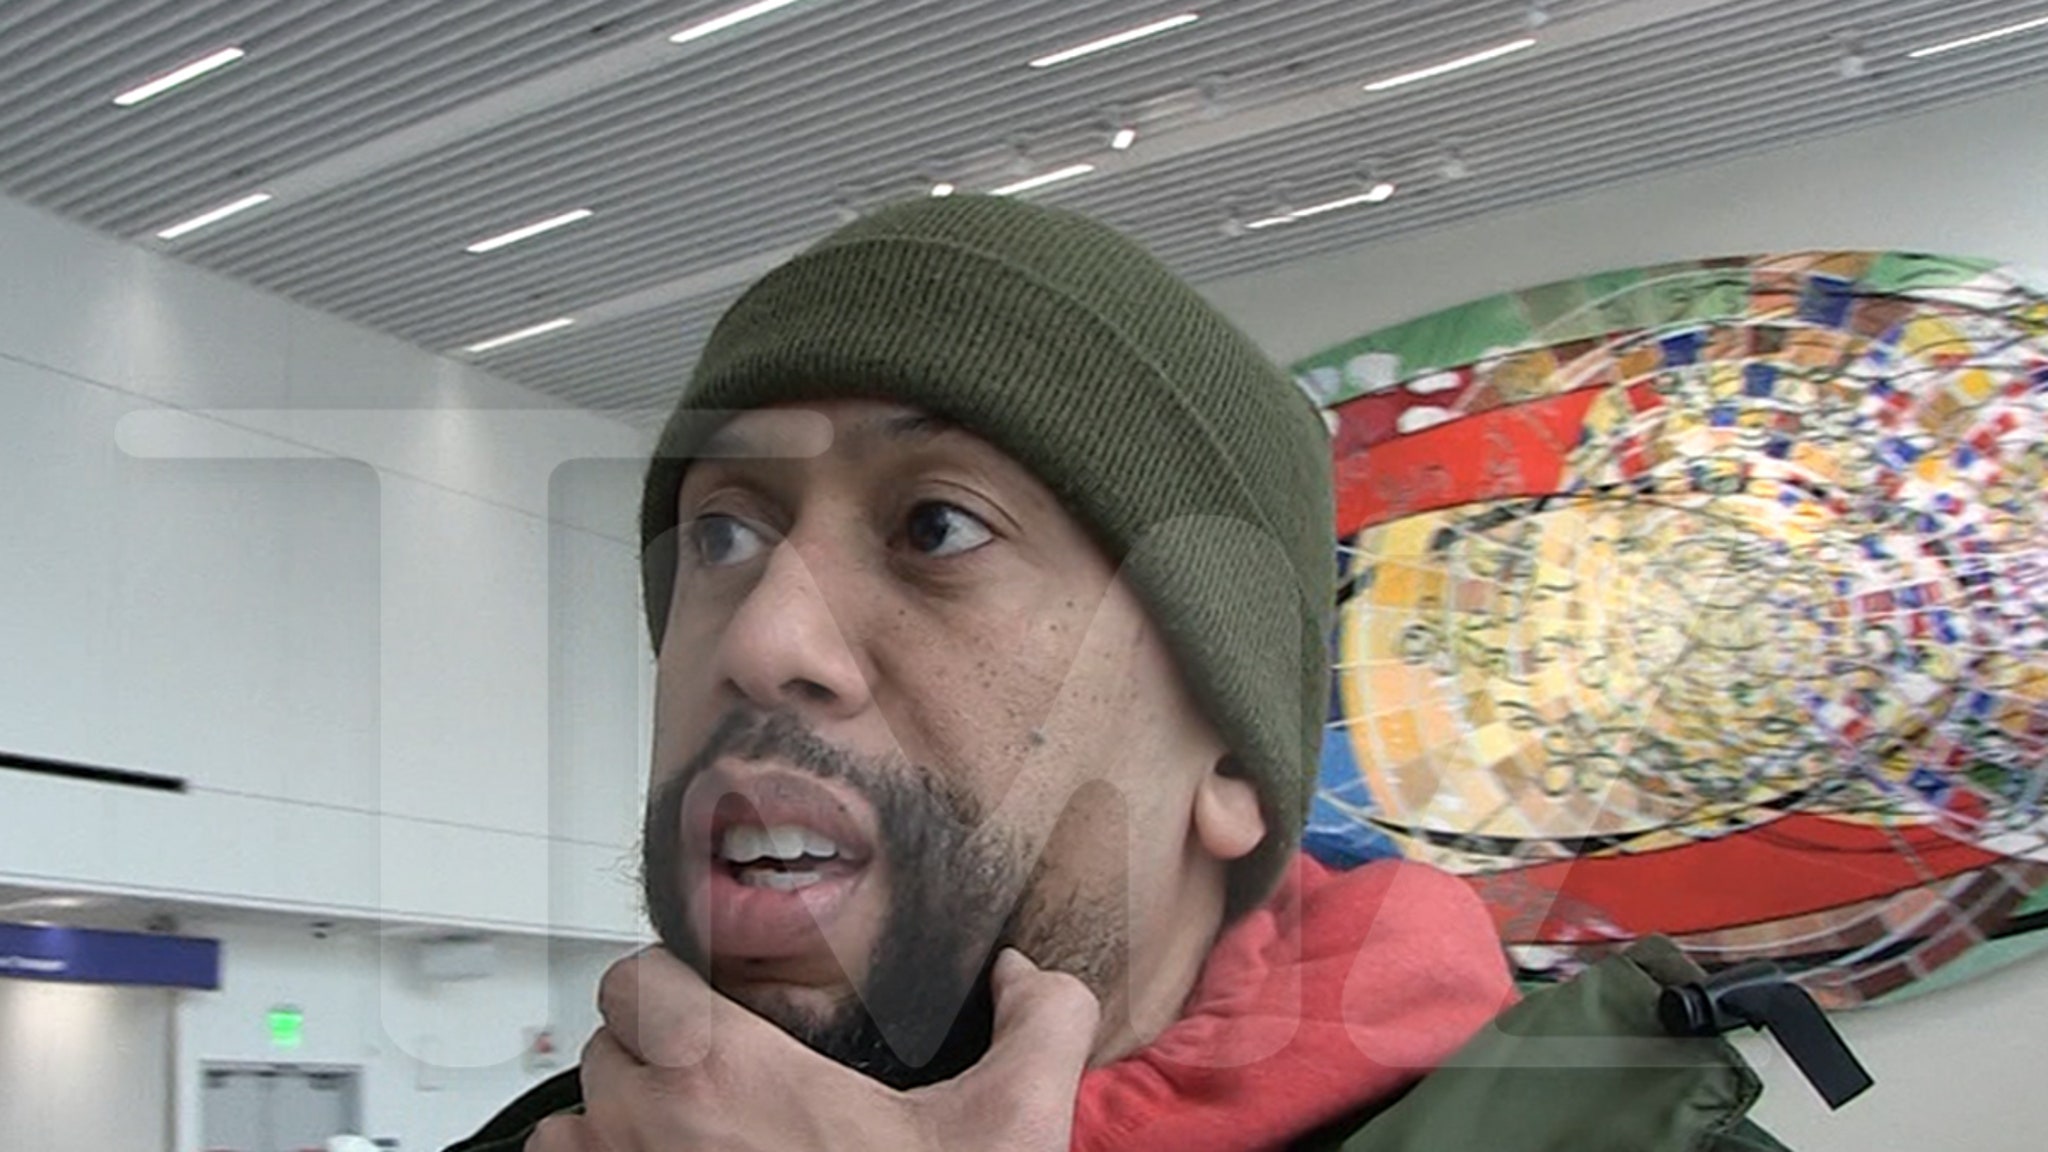 Affion Crockett Spoofs Dozens of Rappers, Including Kanye, In New Film